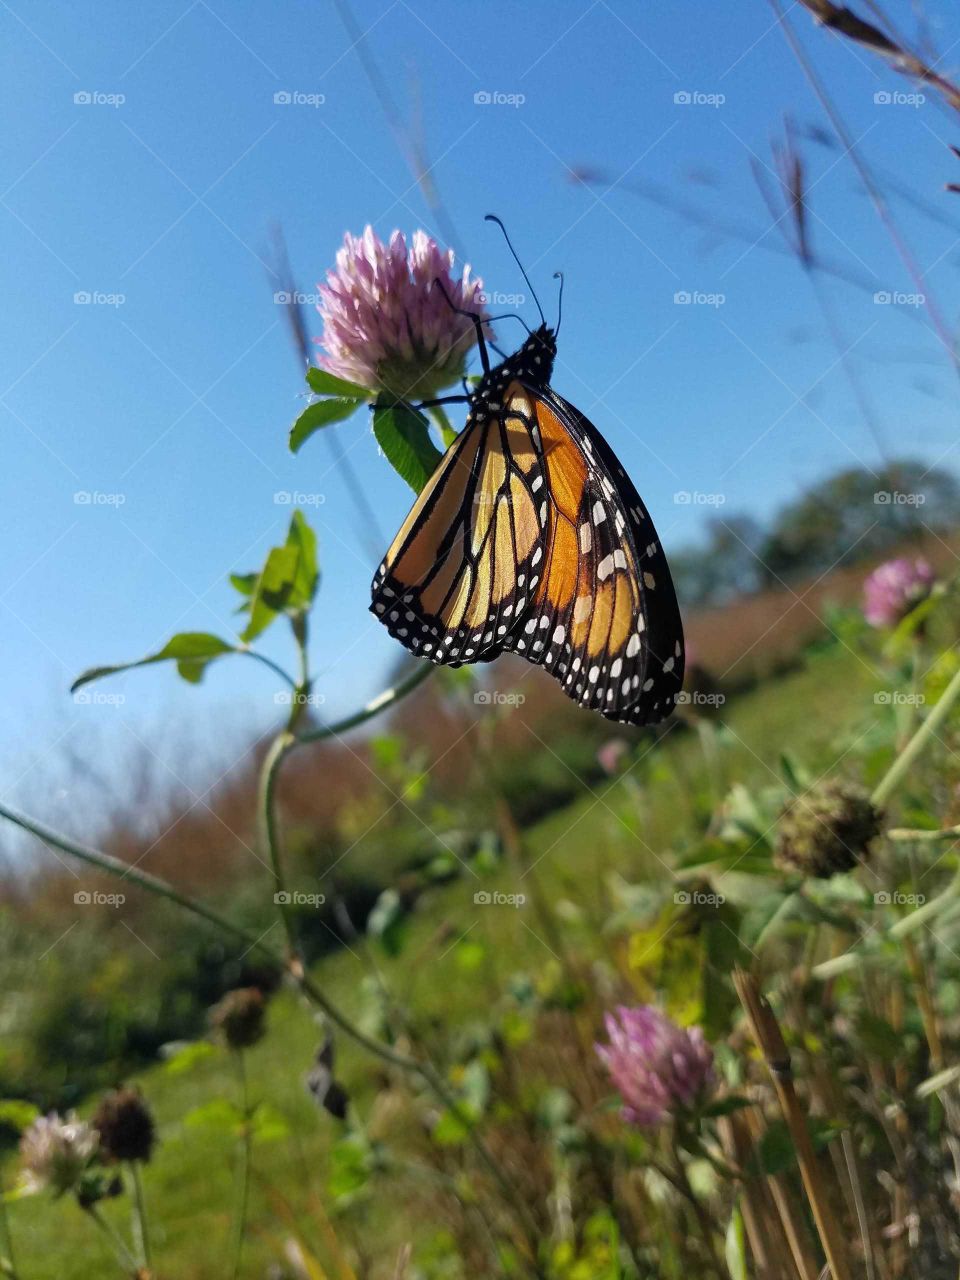 Butterfly, Nature, Insect, Flower, Outdoors